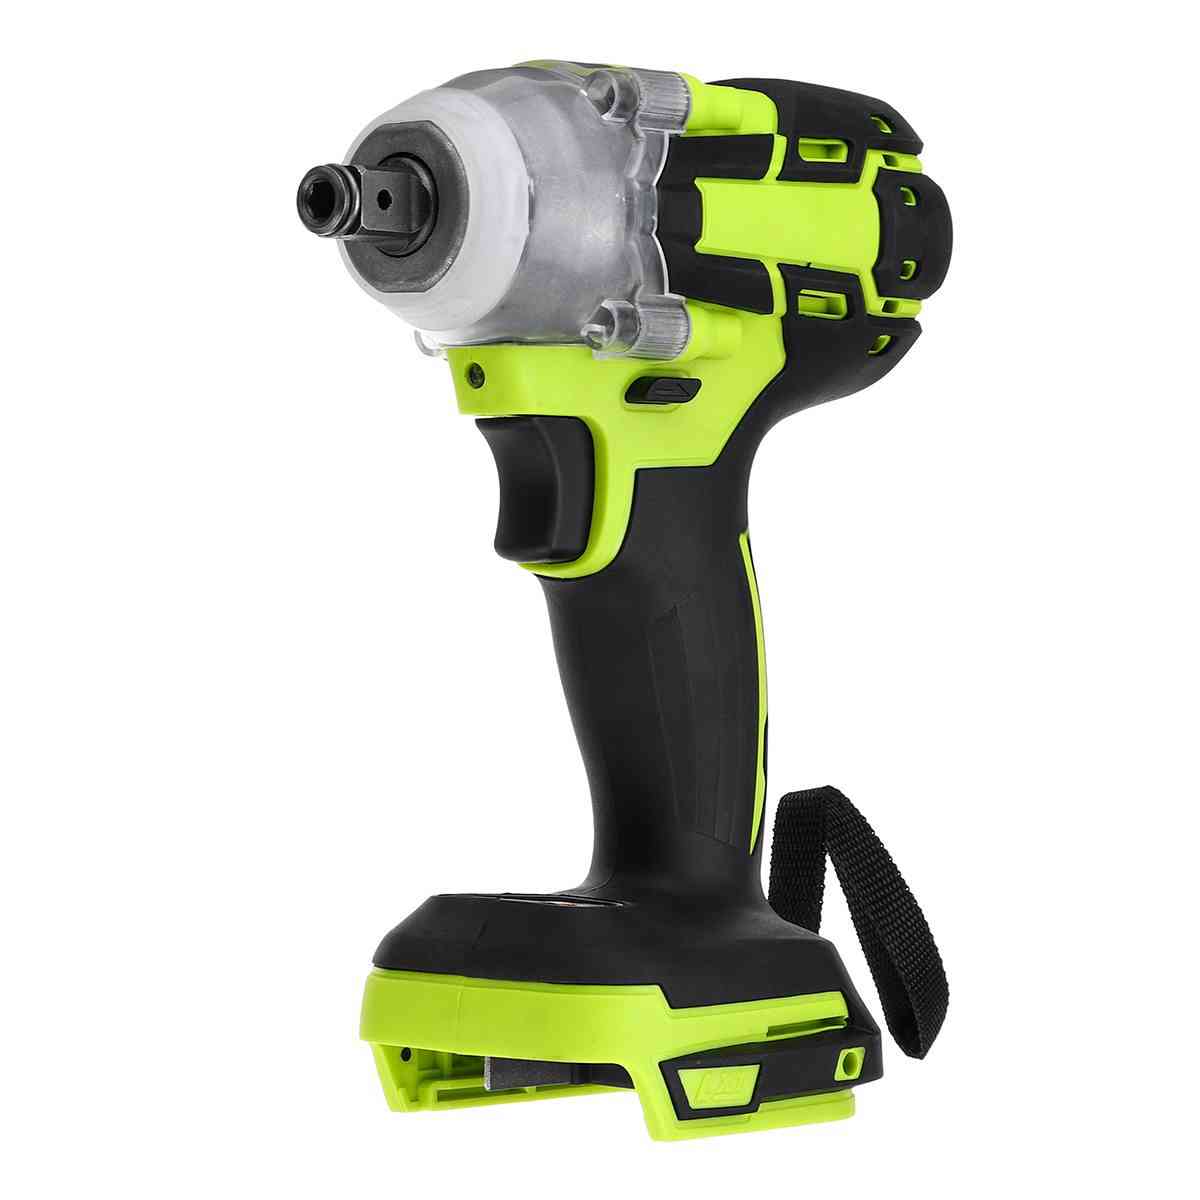 Rechargeable Electric Brushless Cordless Impact Wrench